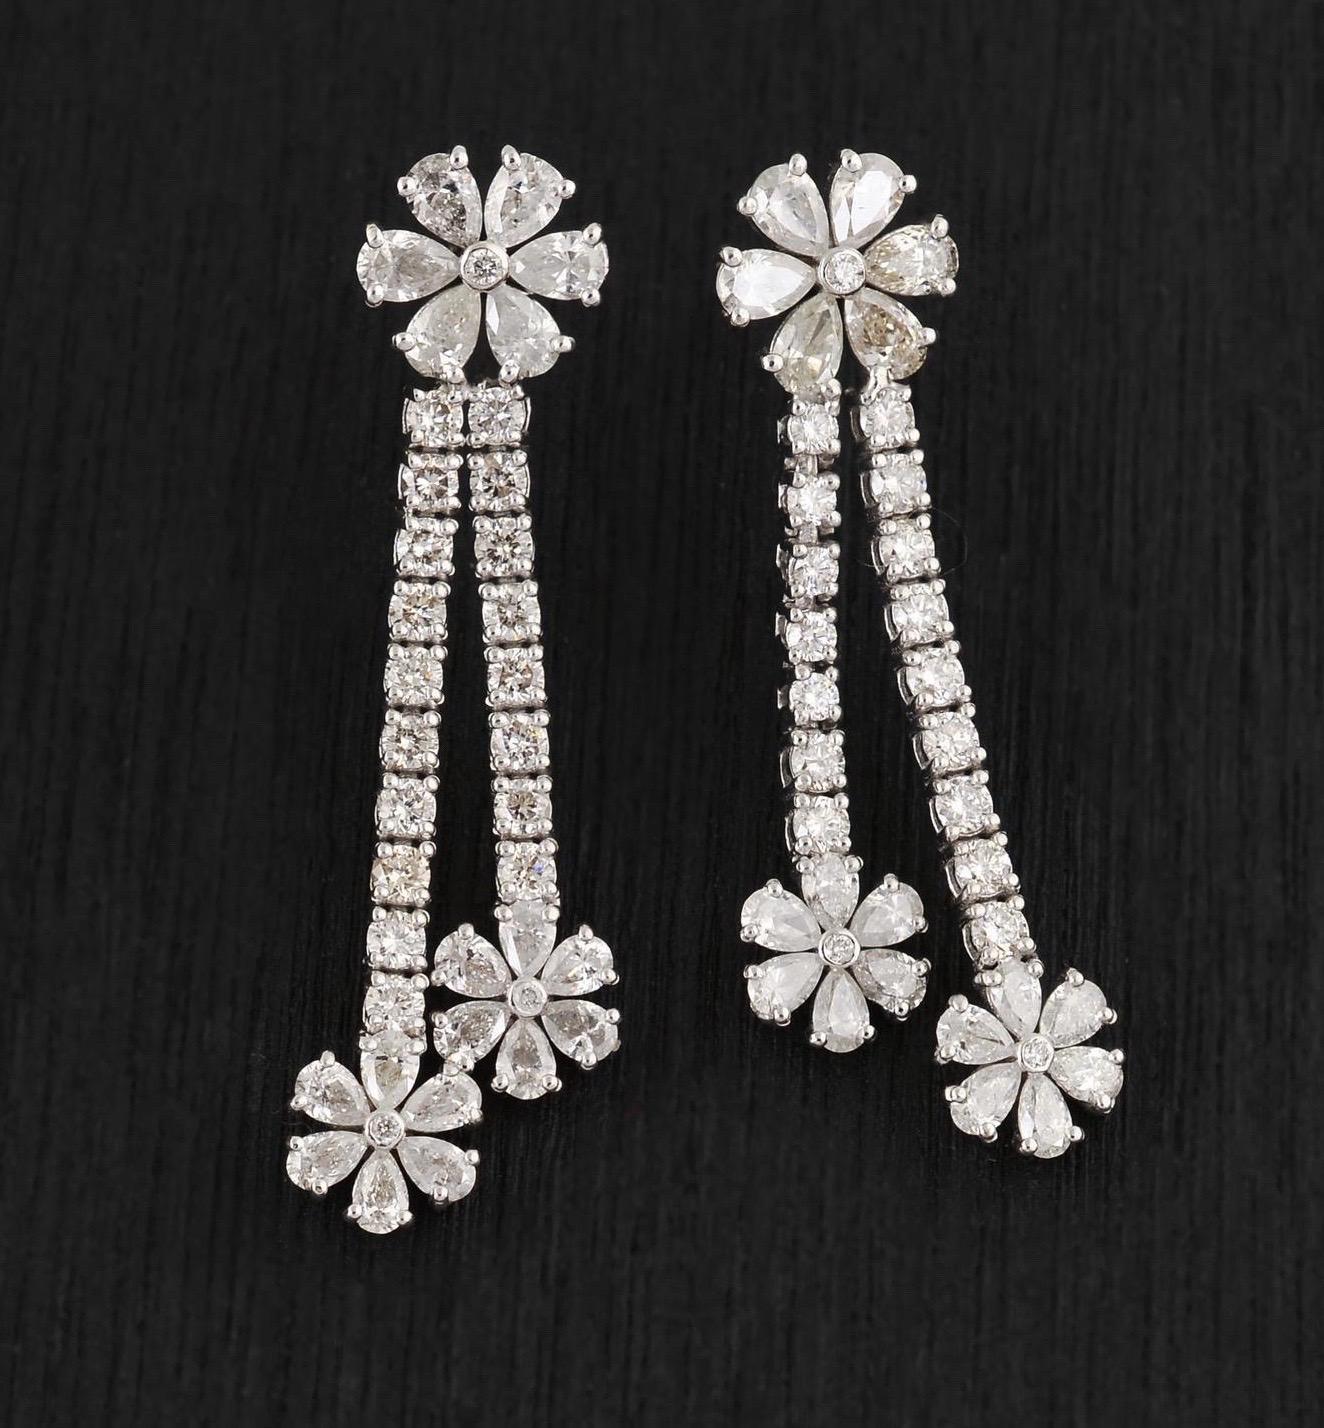 Mixed Cut 3.60 Carat Diamond 18 Karat White Gold Floral Chain Earrings For Sale